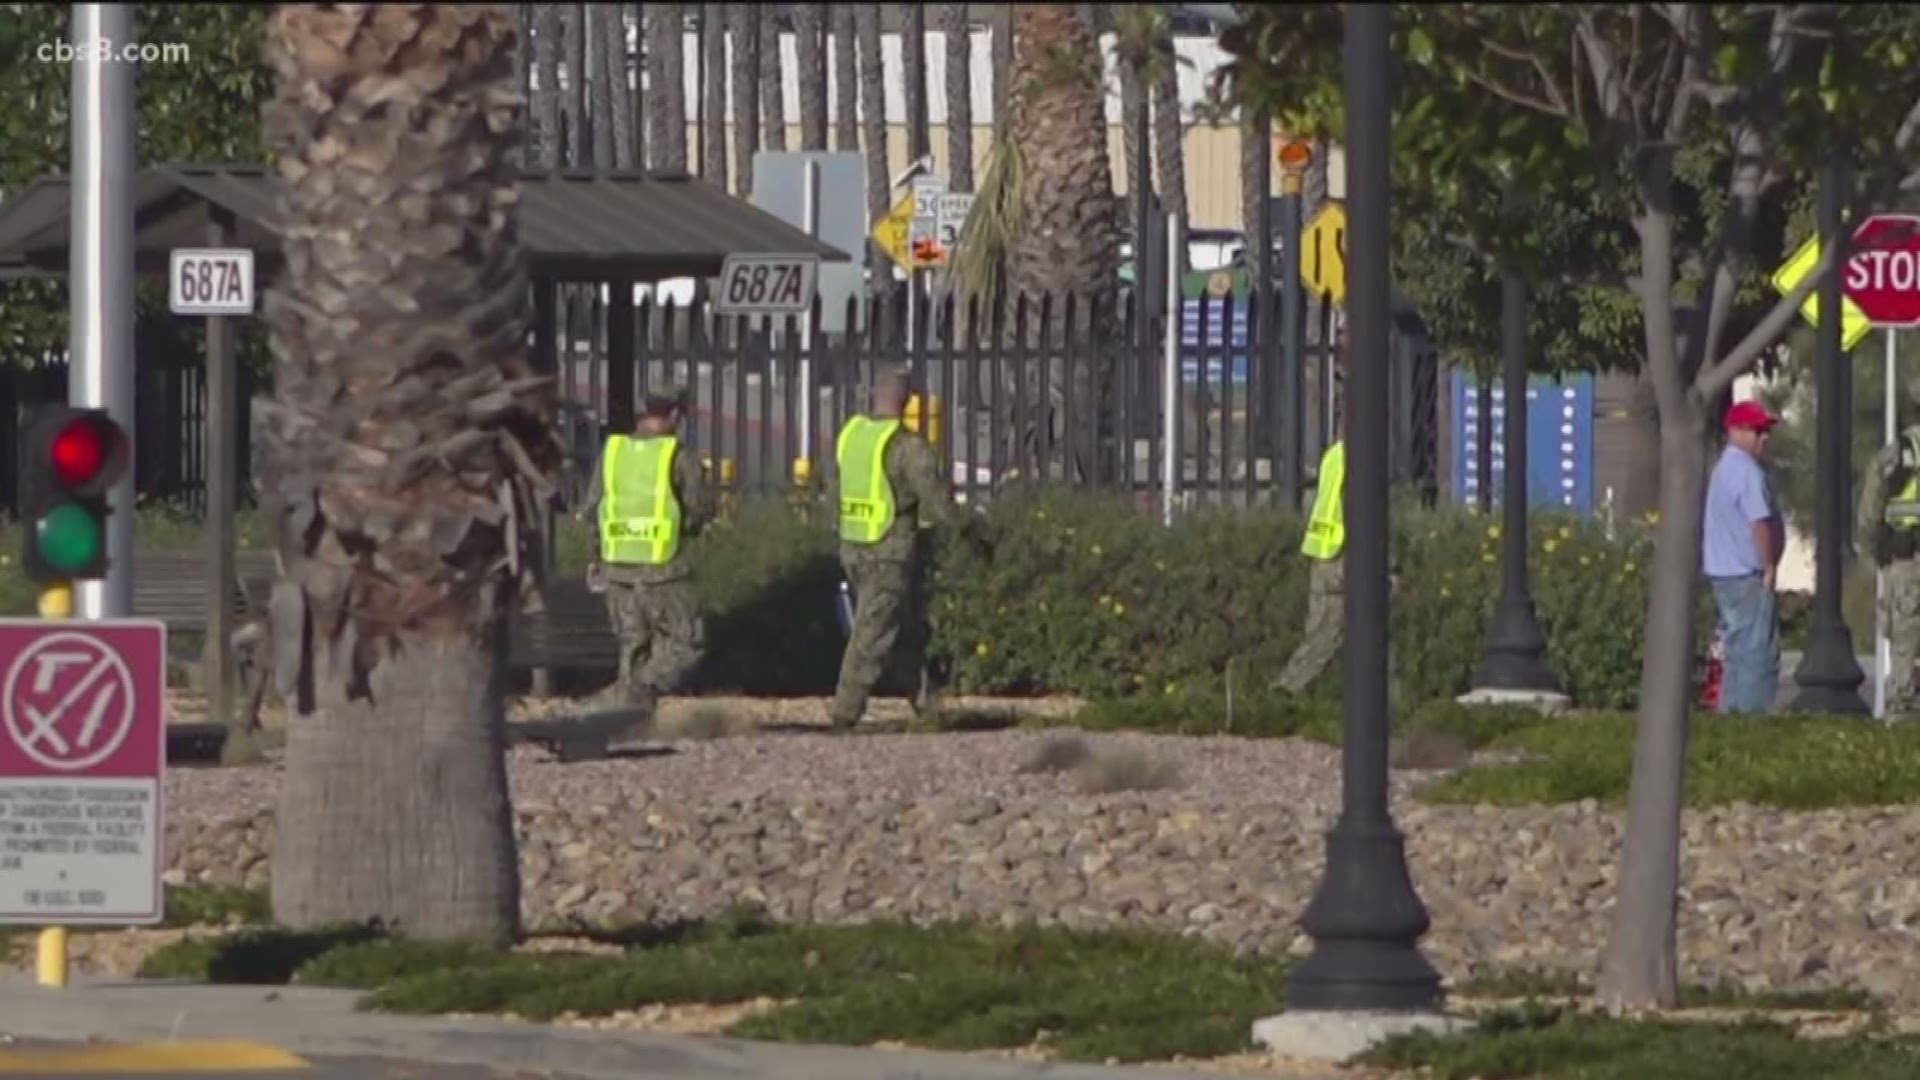 The main gate of the Naval Air Station North Island has reopened after a brief shut down due to a security situation, according to the Coronado Police Department.